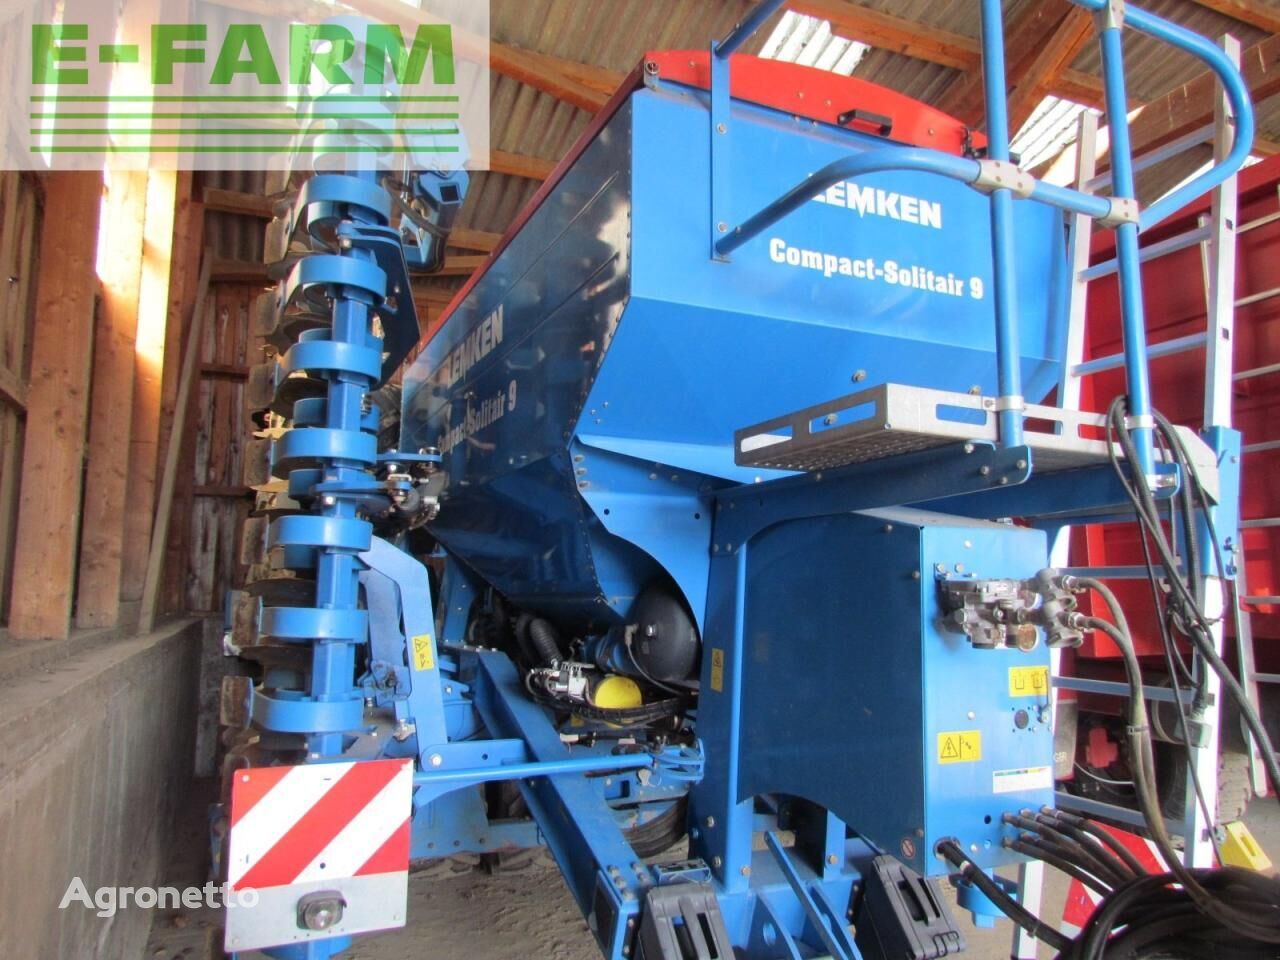 Lemken compact-solitair 9/600 combine seed drill